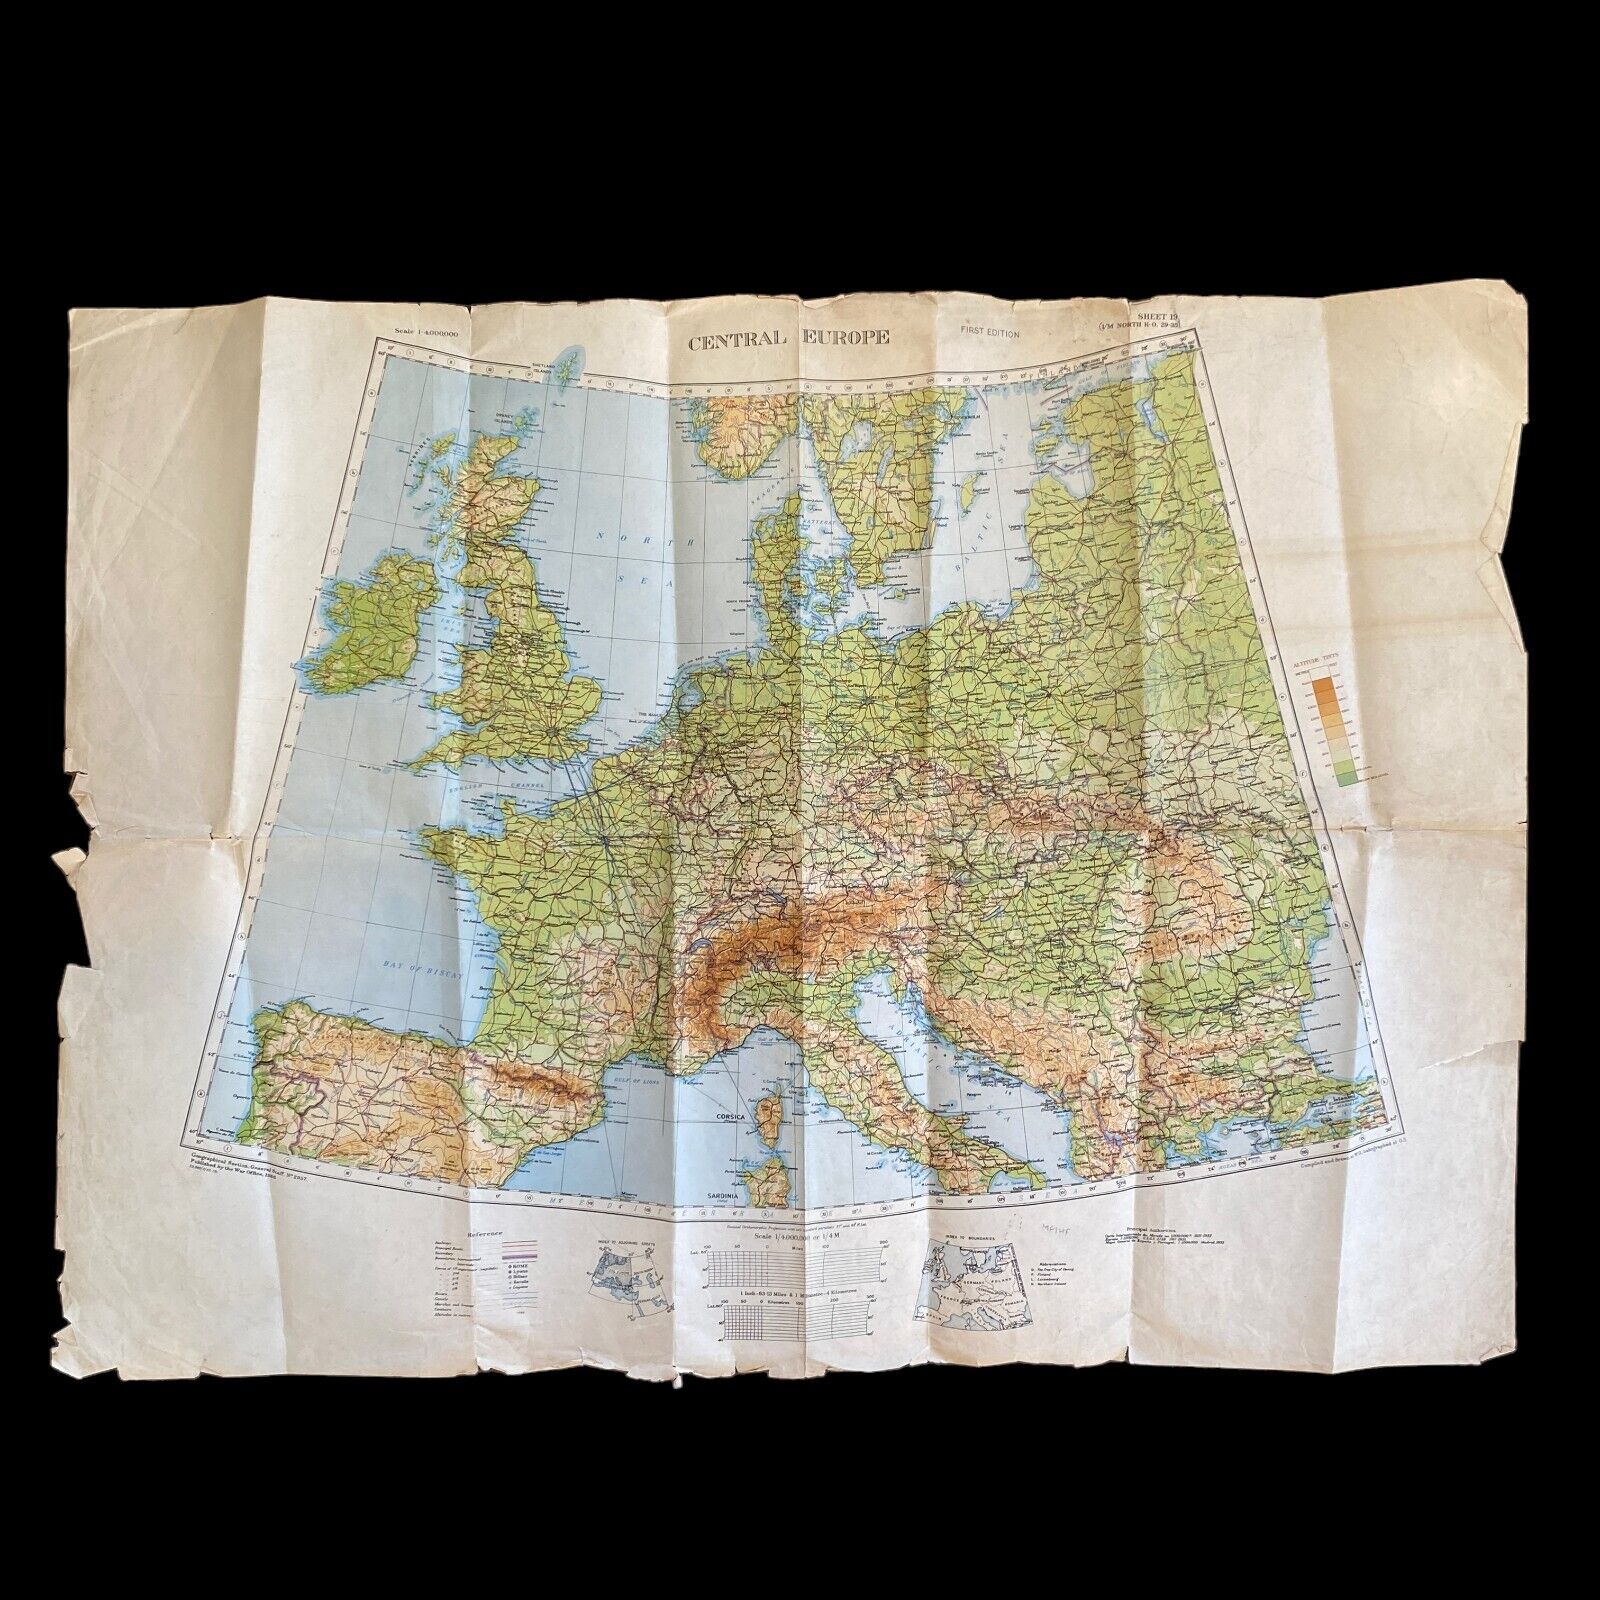 RARE WWII 1st EDITION Allied Headquarters Strategic Air Campaign ETO Map